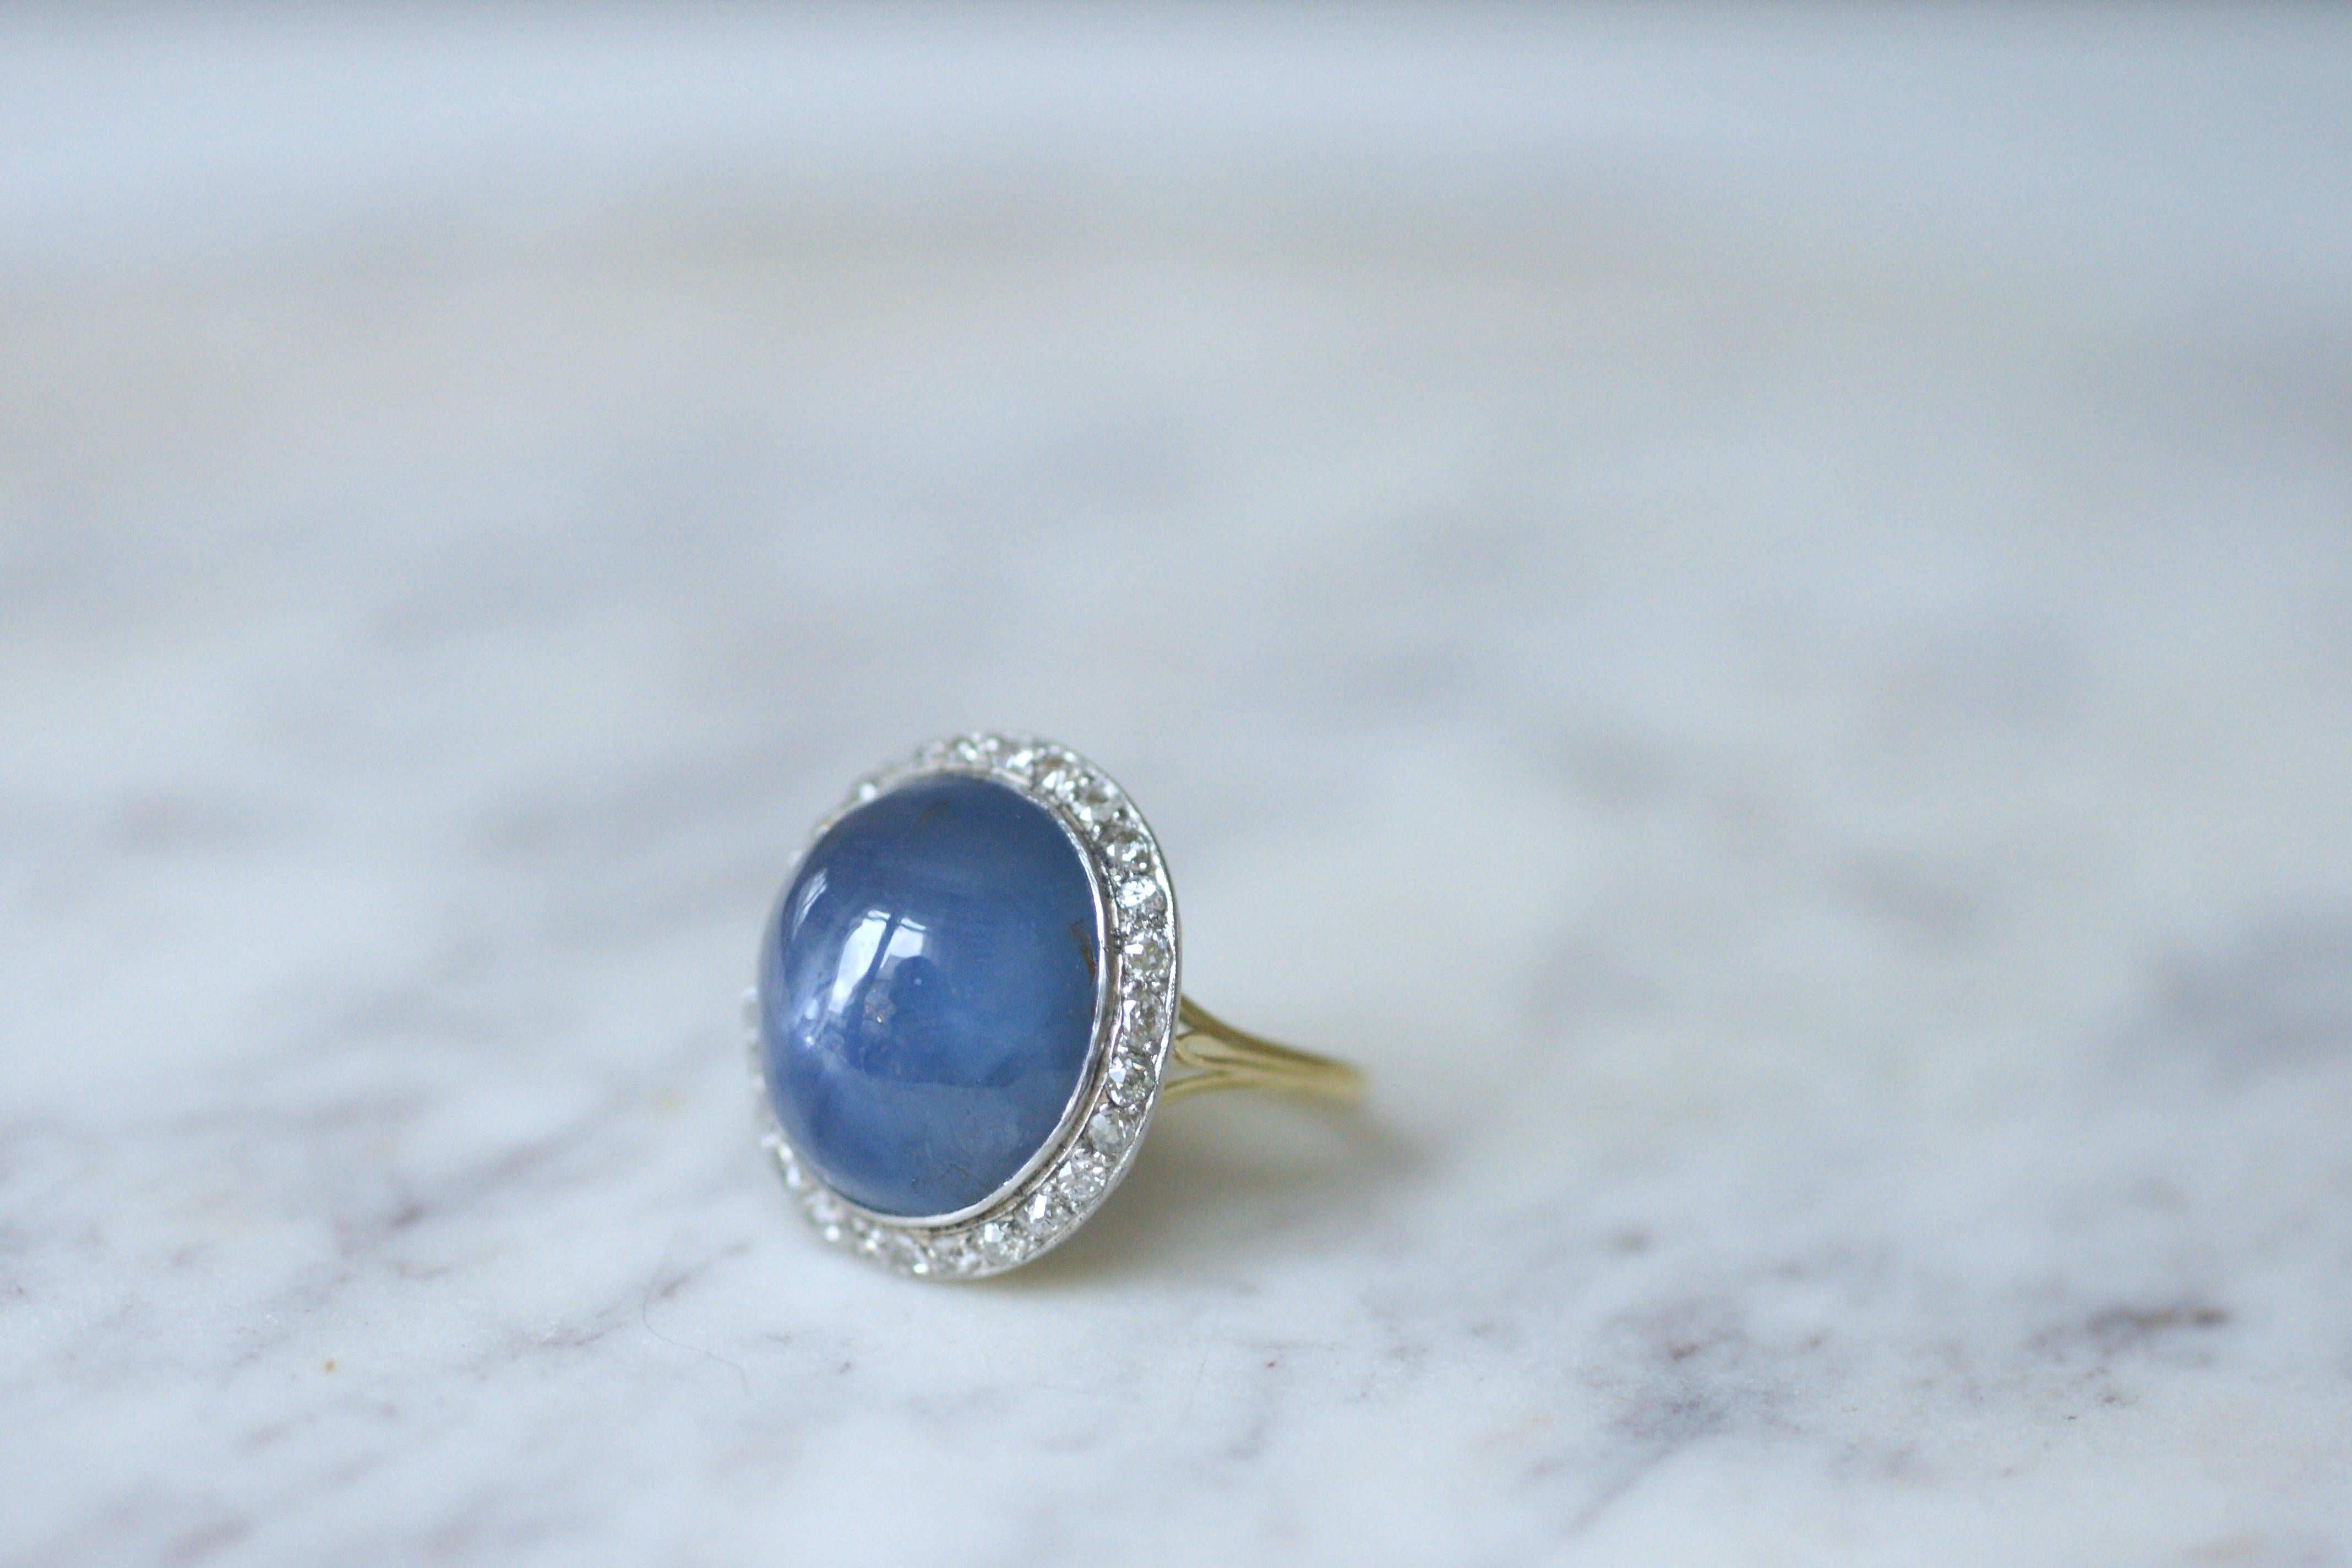 Edwardian Gold and Platinum Cluster Ring with 35cts Ceylan Star Sapphire Caboch 7